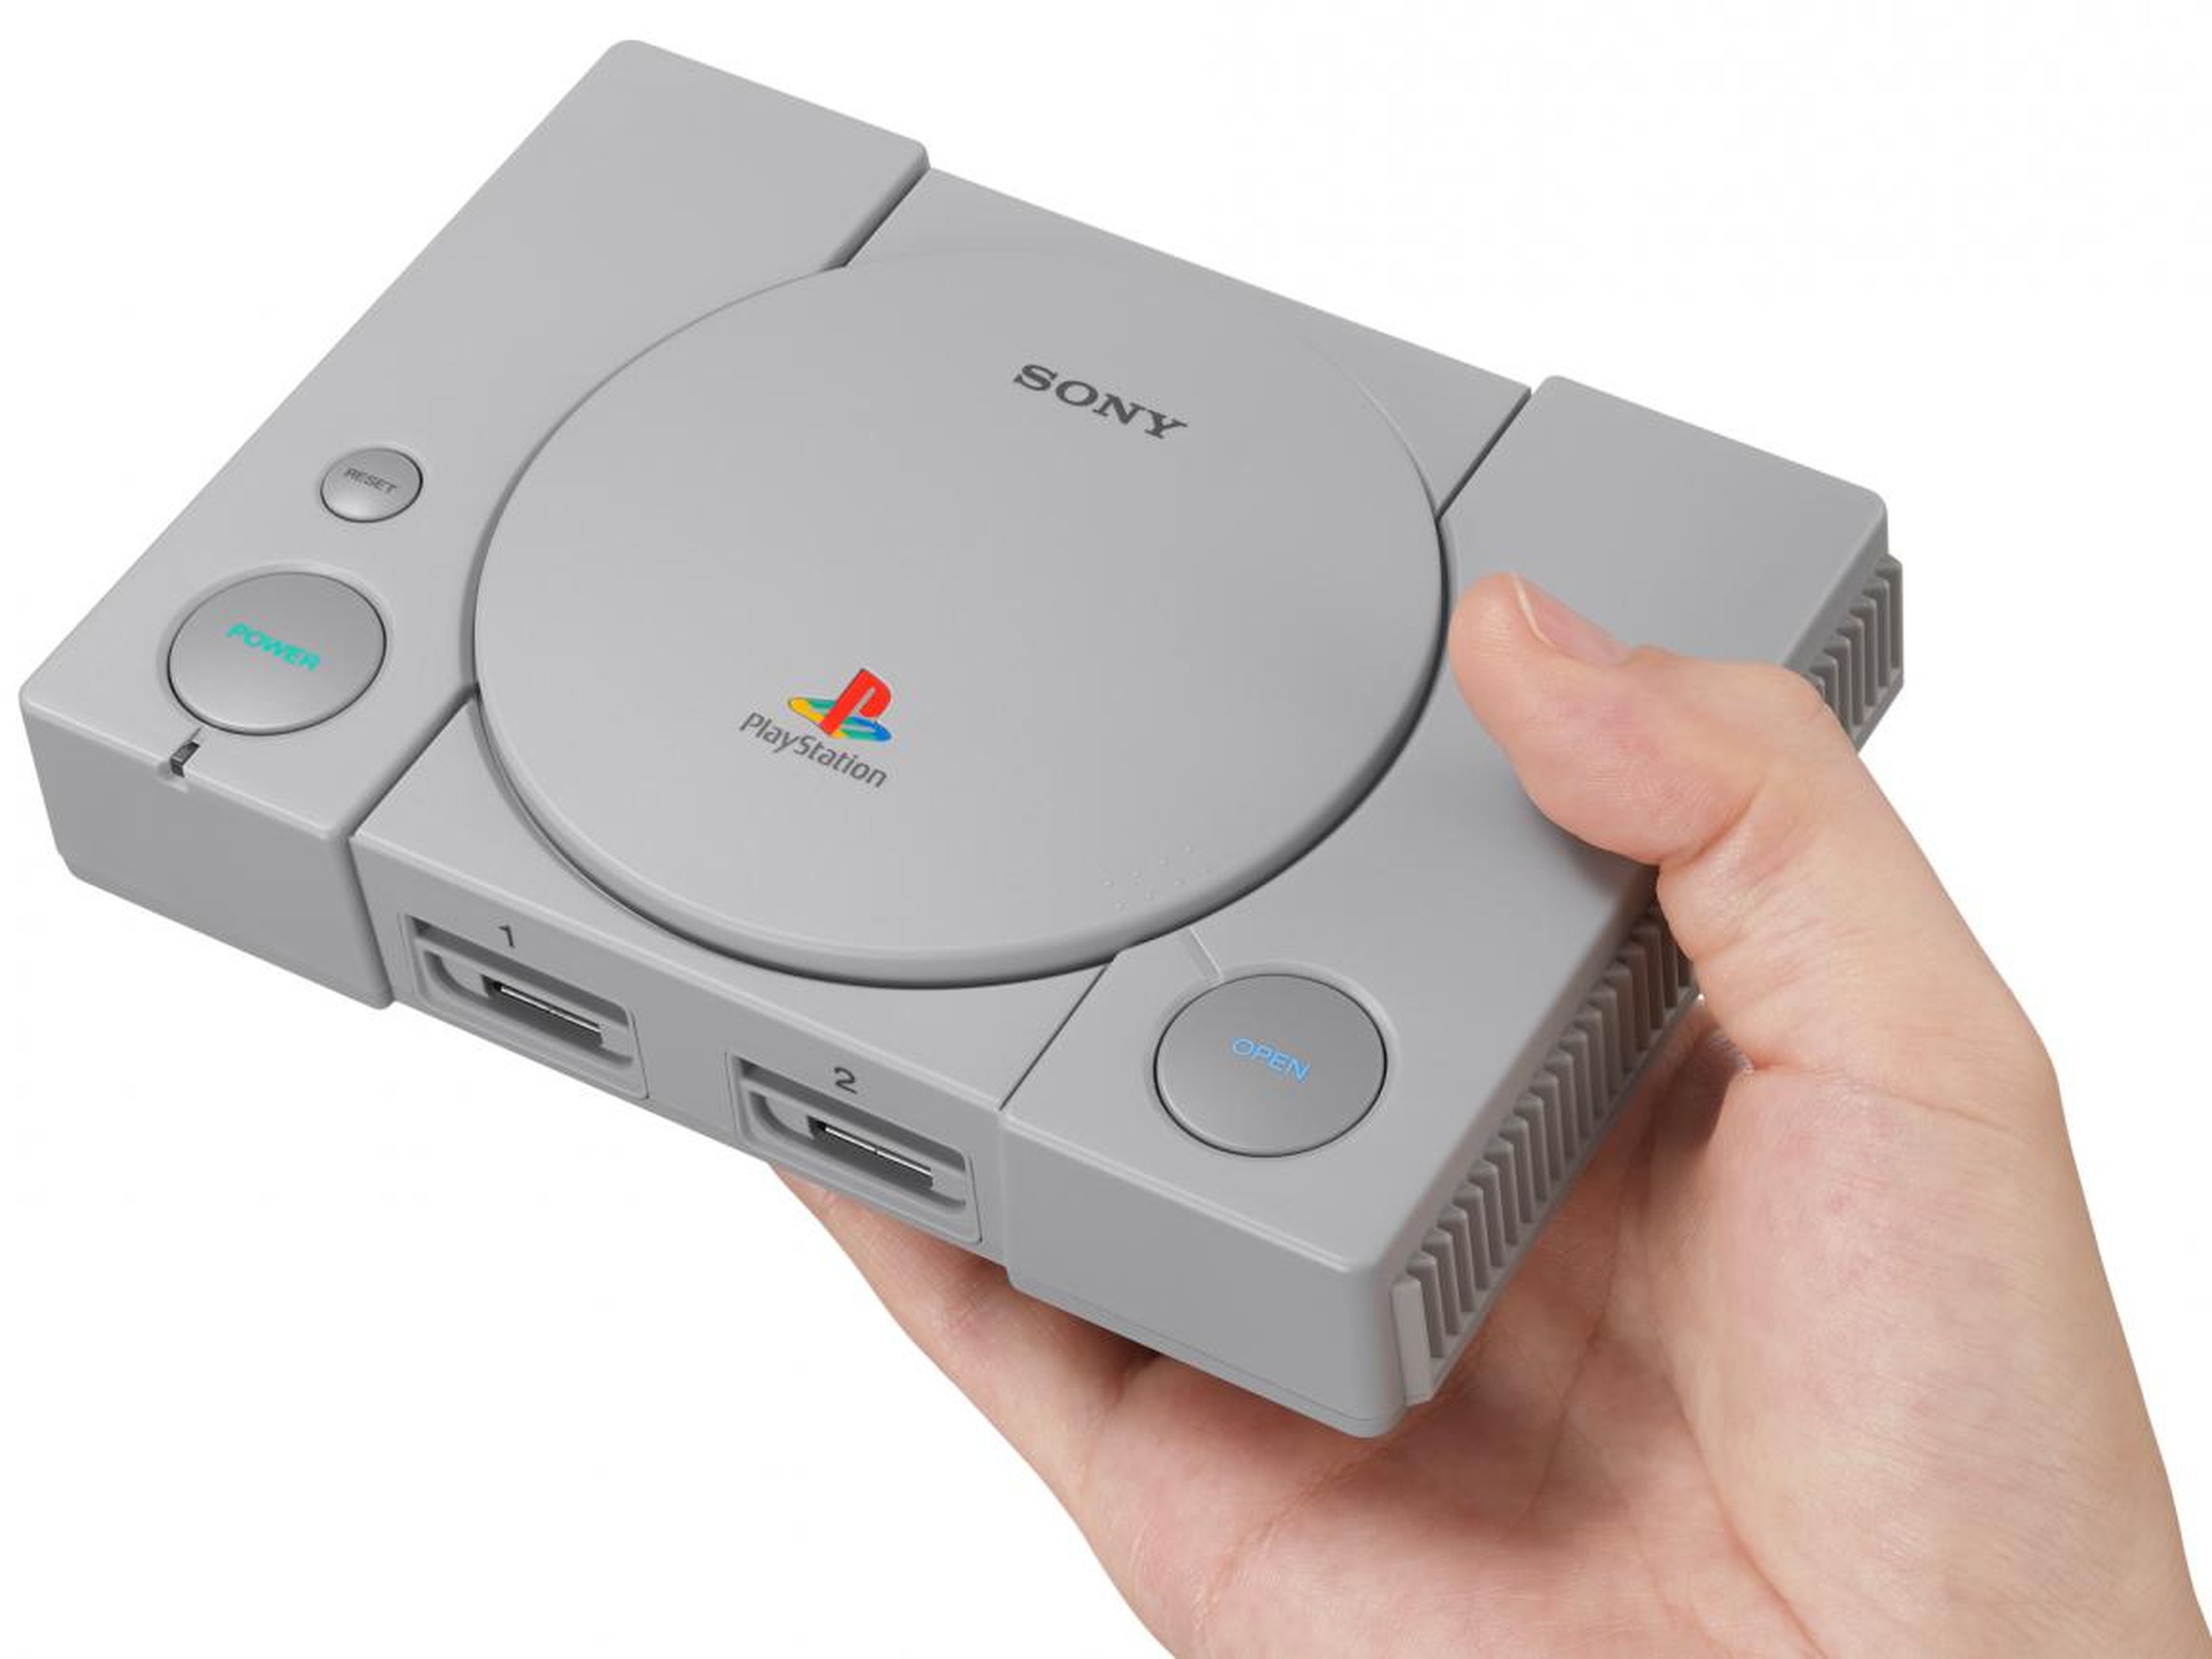 The PlayStation Classic is small enough to hold in your hand.